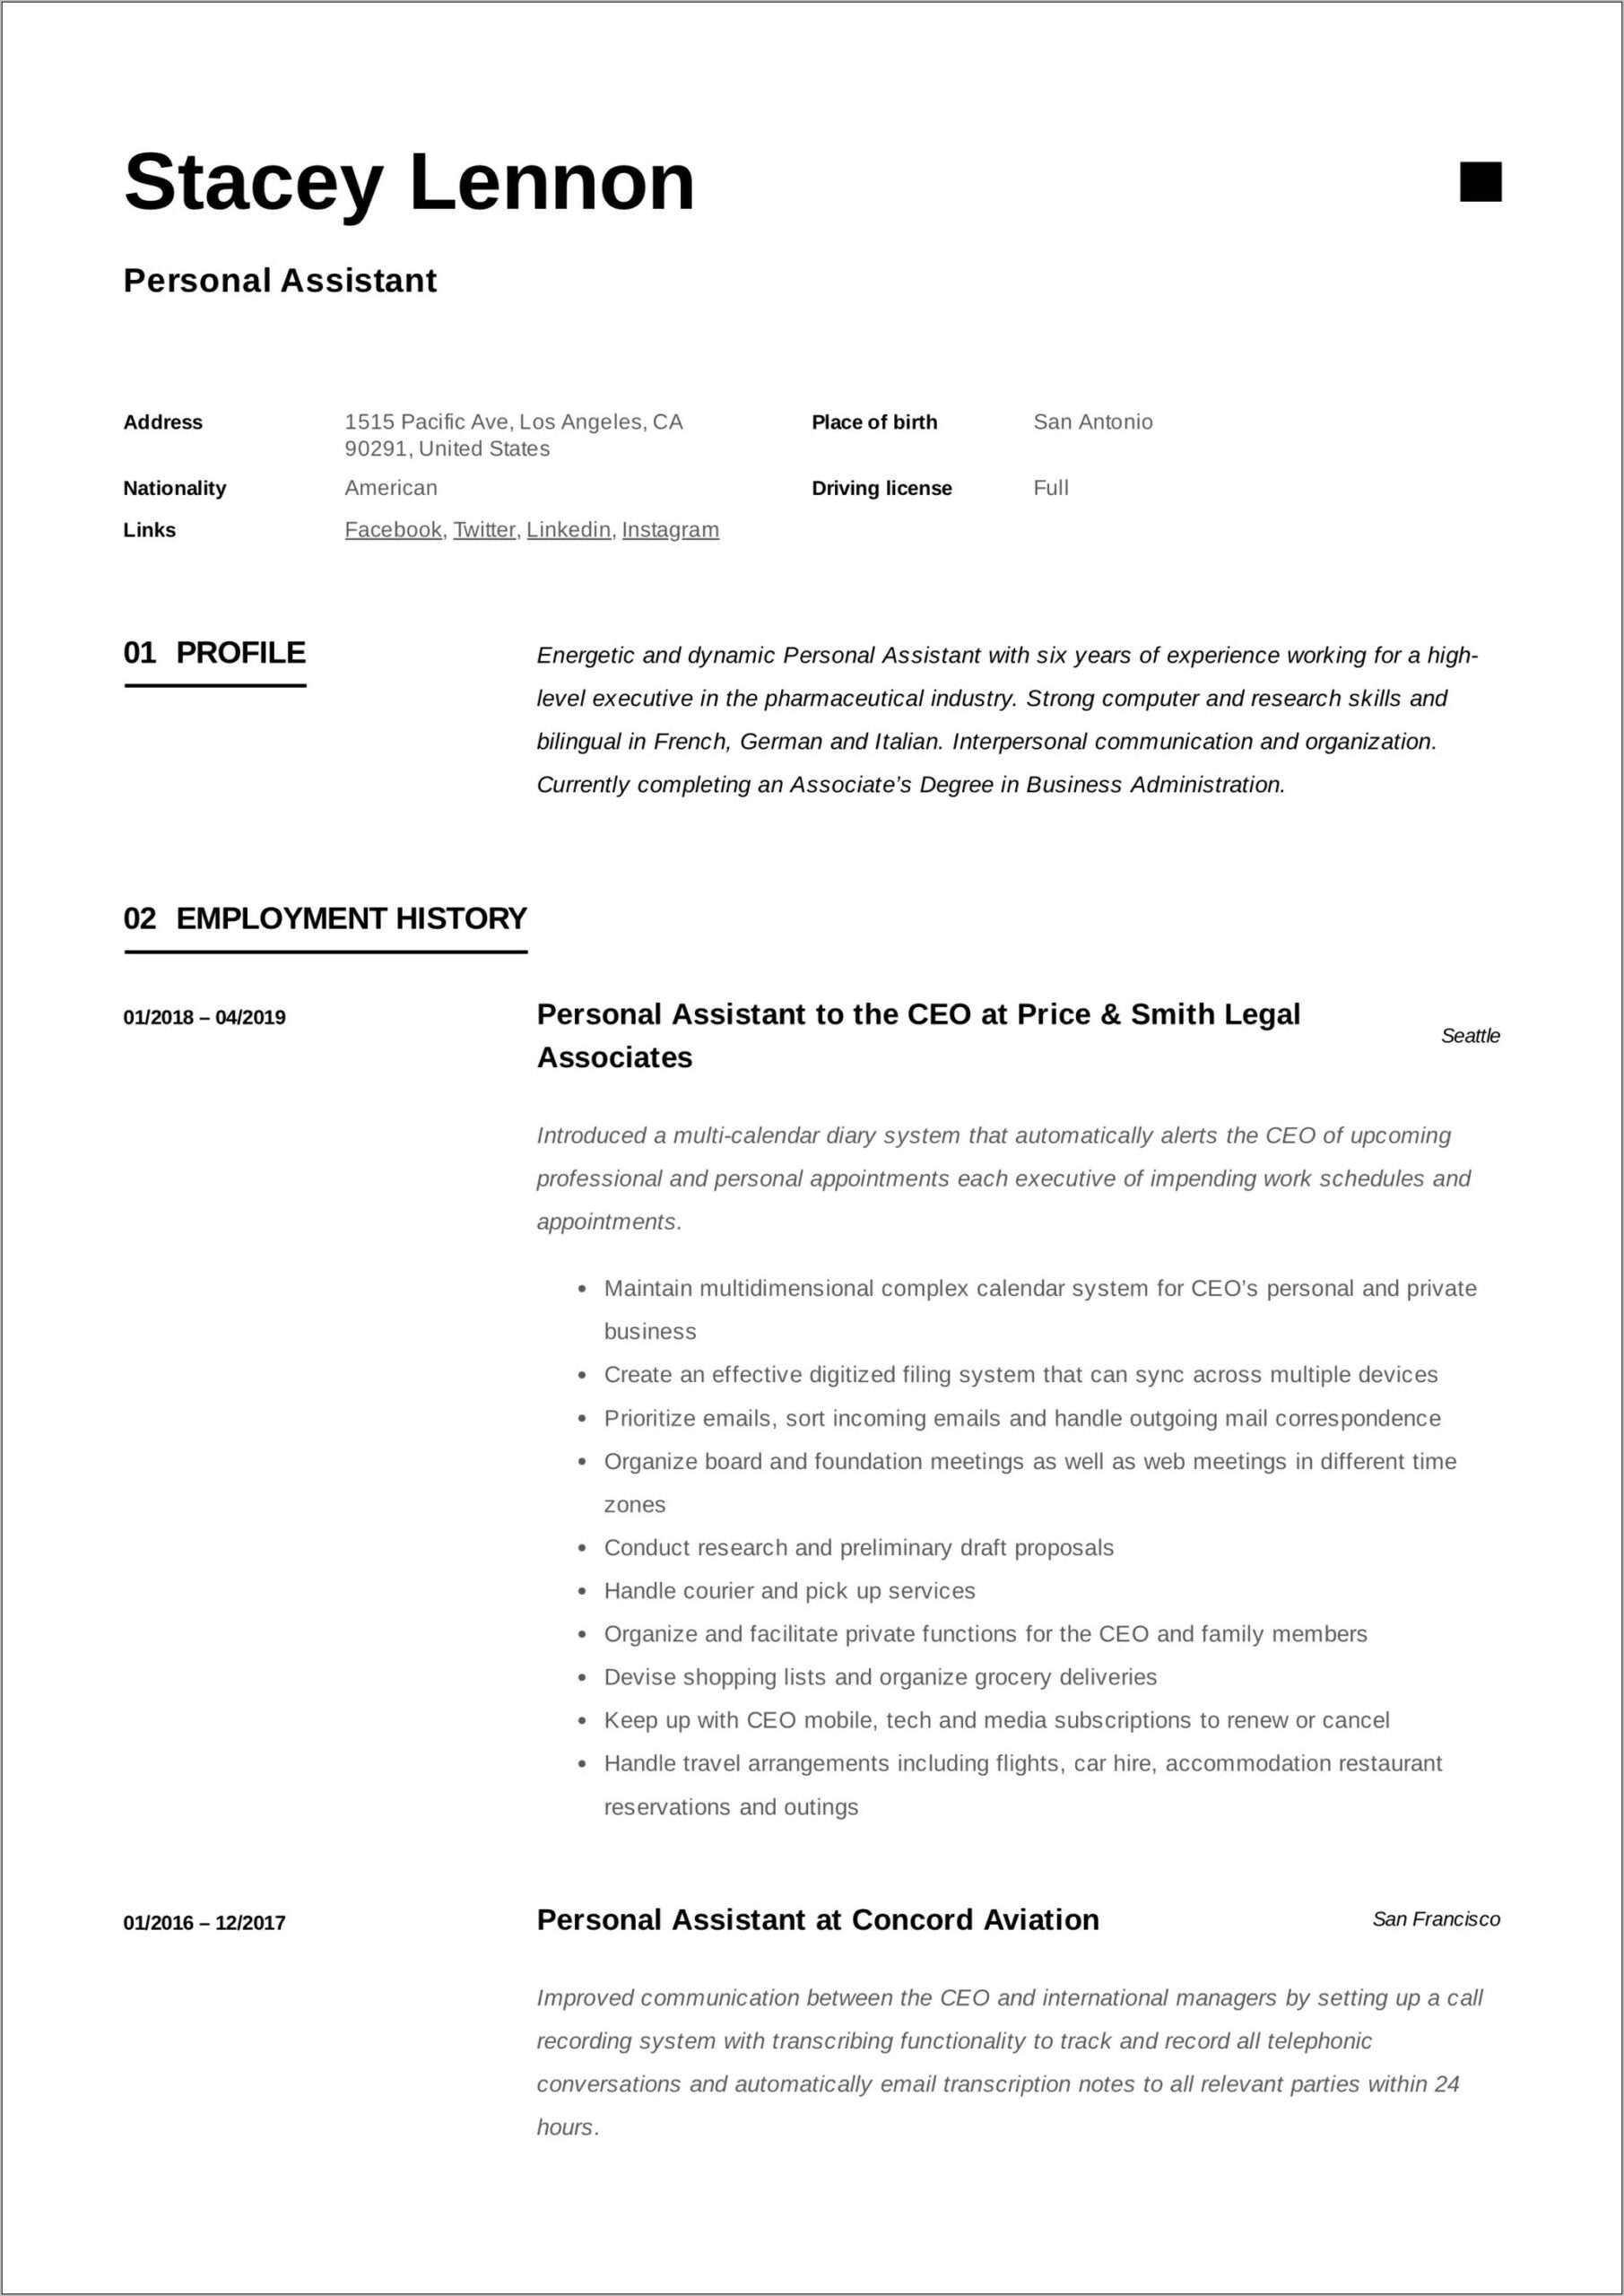 Resume Work Experience For Personal Assistant